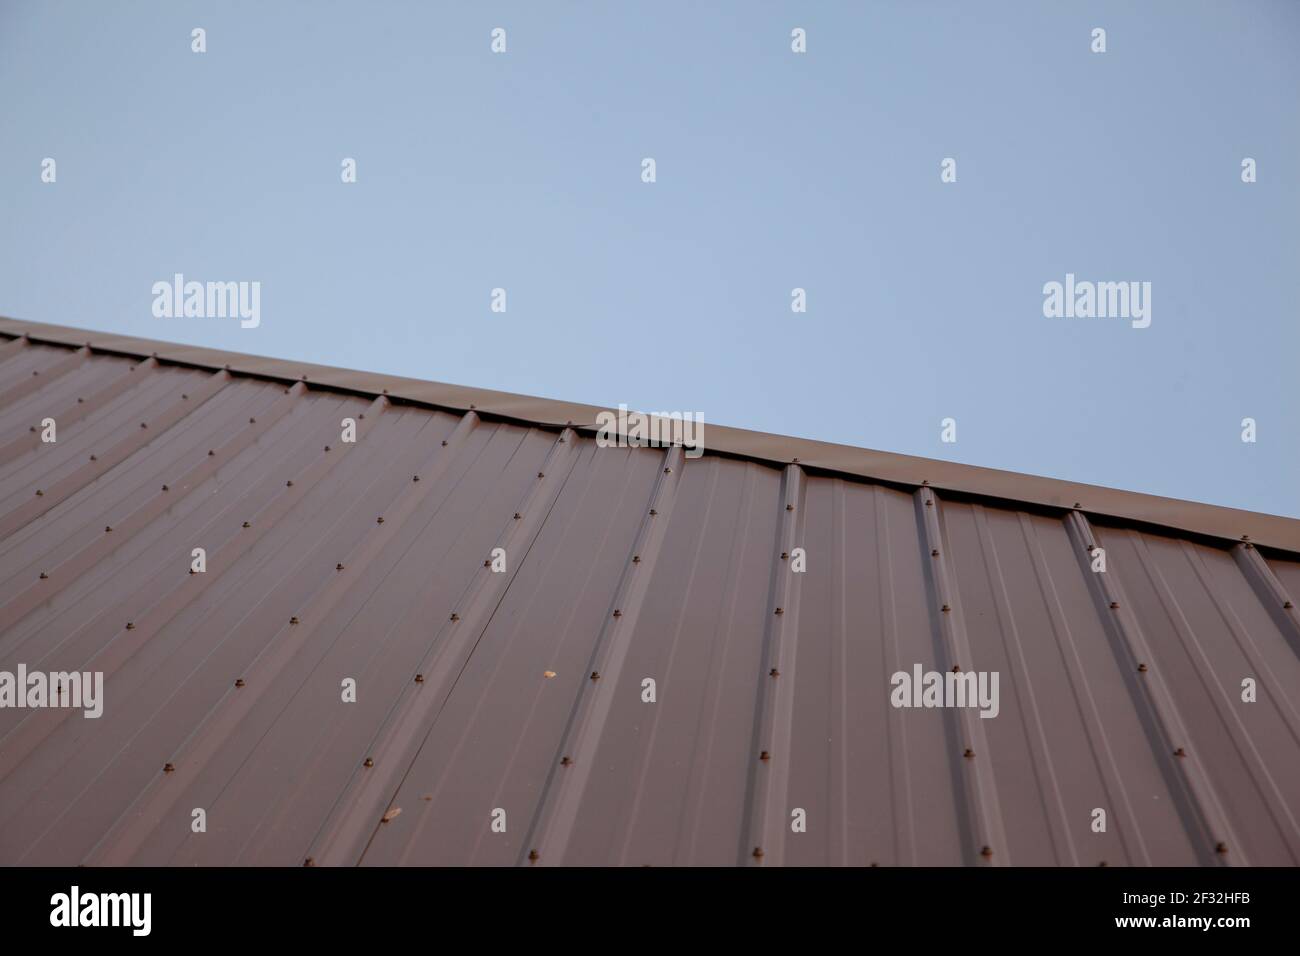 a new metal roof with bolts cuts diagonally across the frame against a clear blue skyline Stock Photo